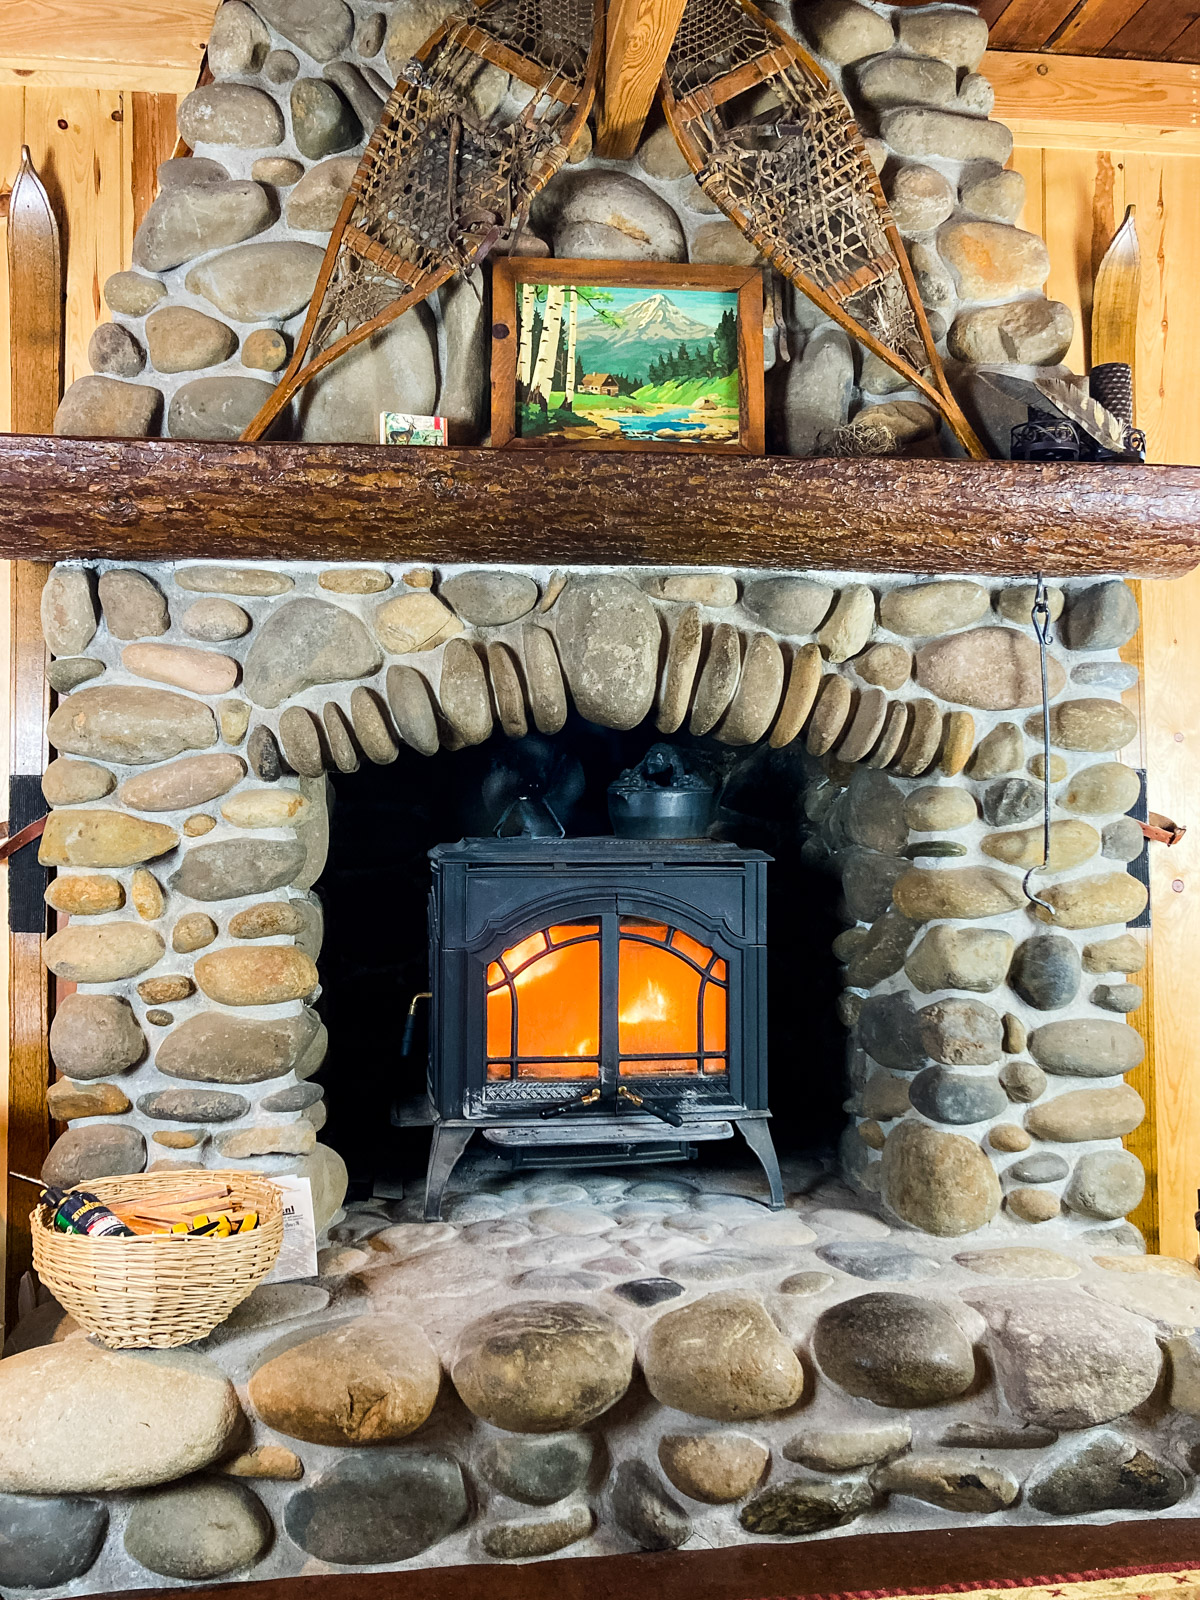 River rock fireplace with wood burning stove inset. A fire is burning in the stove.